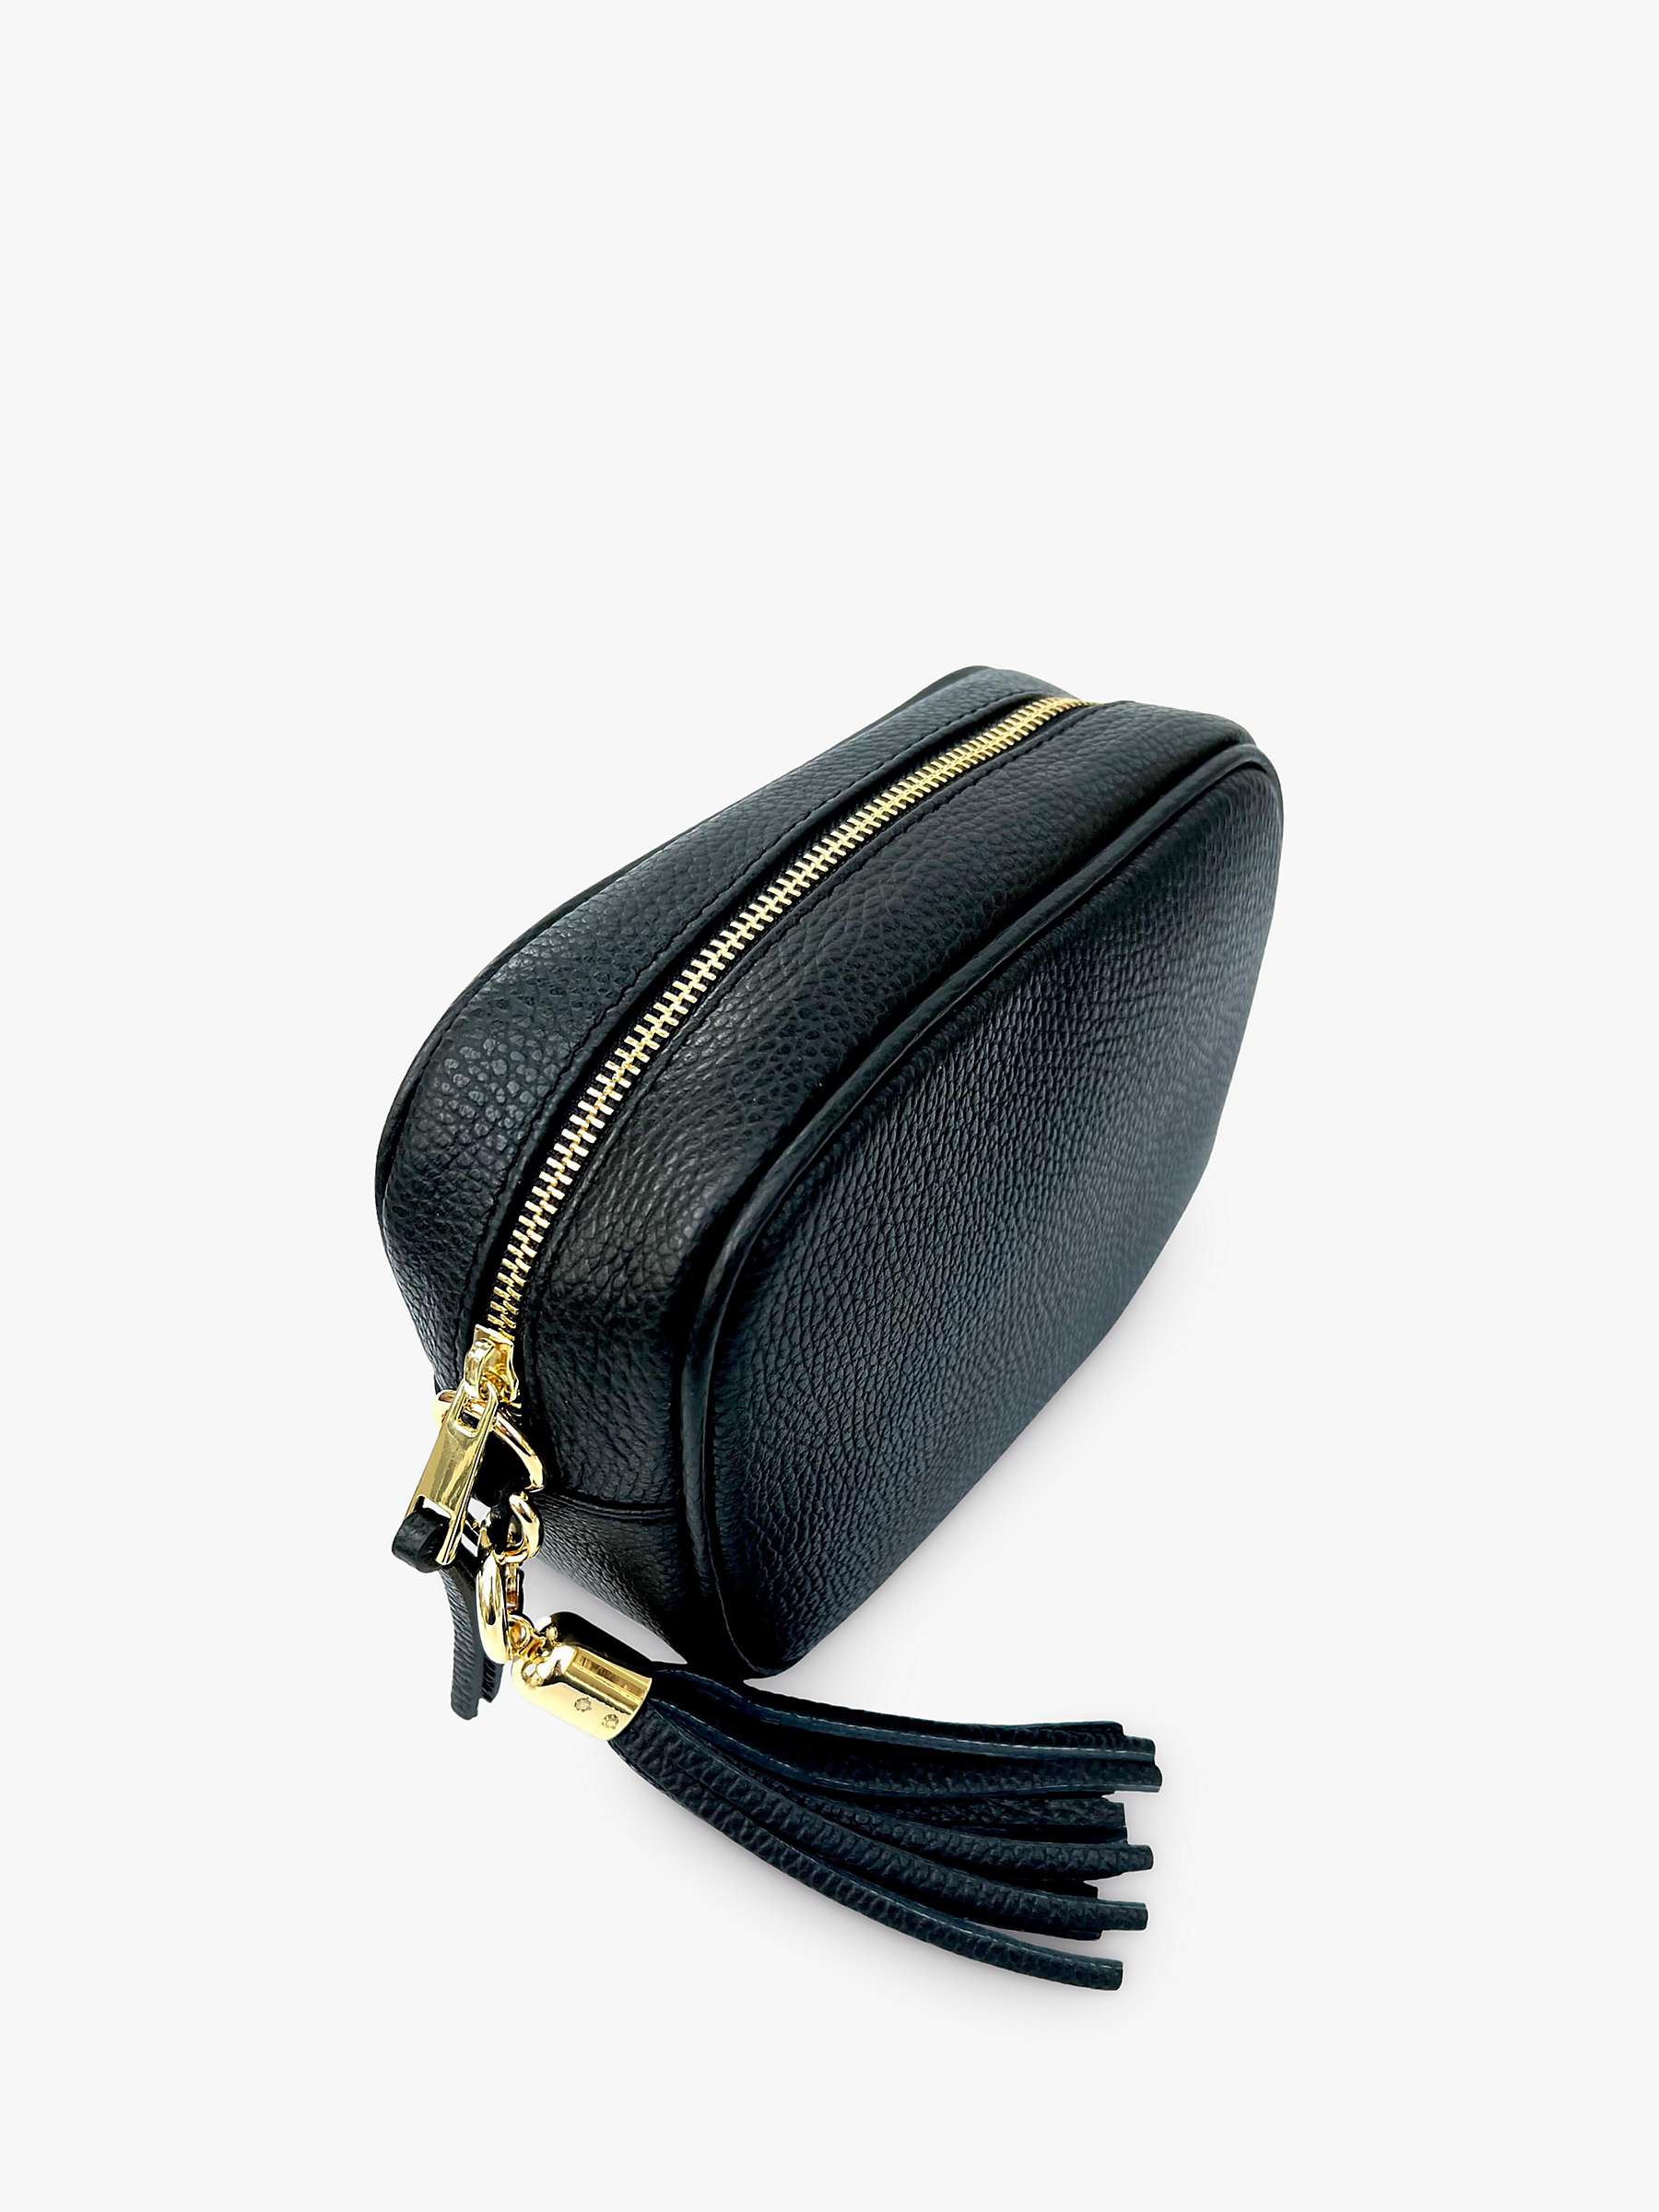 Buy Apatchy Stripe Strap Leather Crossbody Bag Online at johnlewis.com